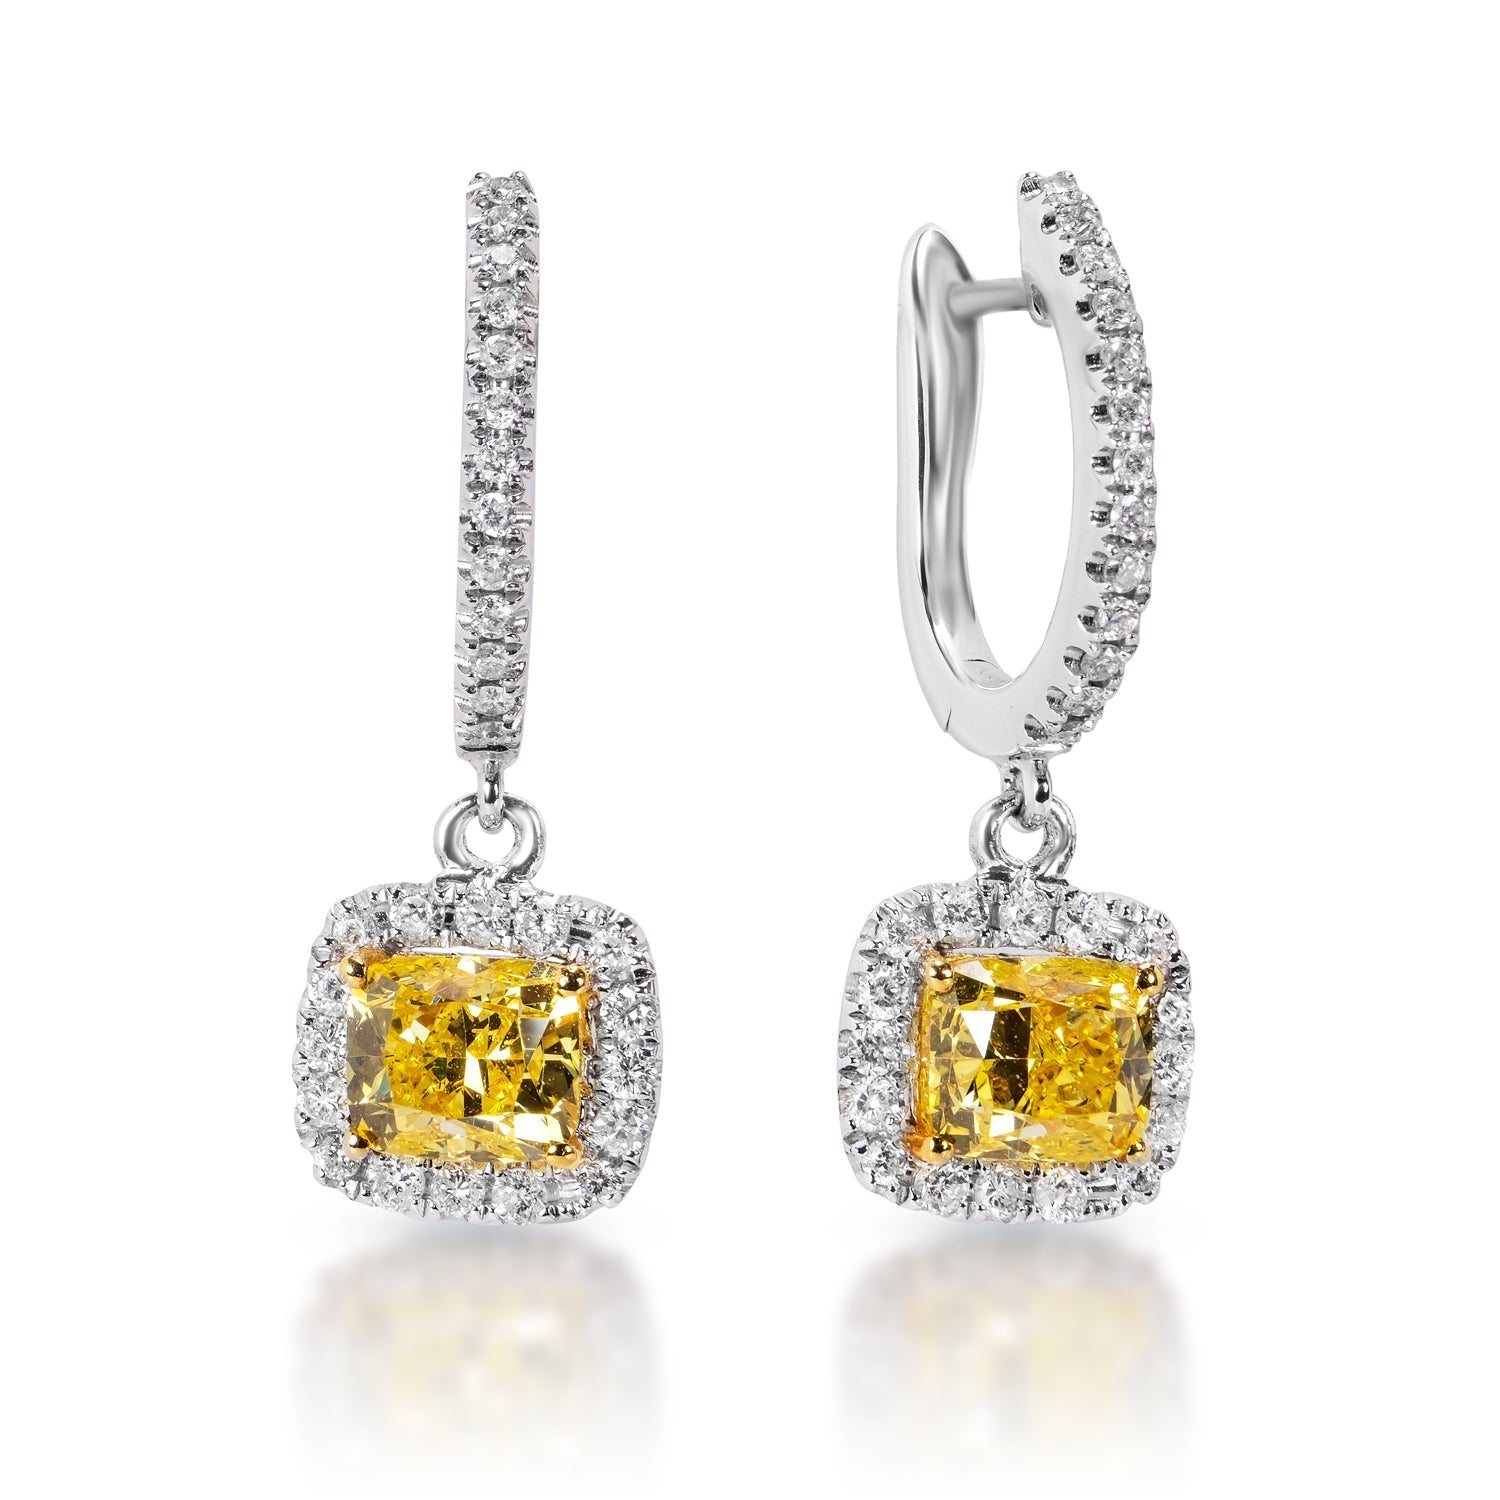 Madeleine 1 Carat Cushion Cut Diamond Leverback Earrings  with yellow diamonds in 14k White Gold Front and Side View